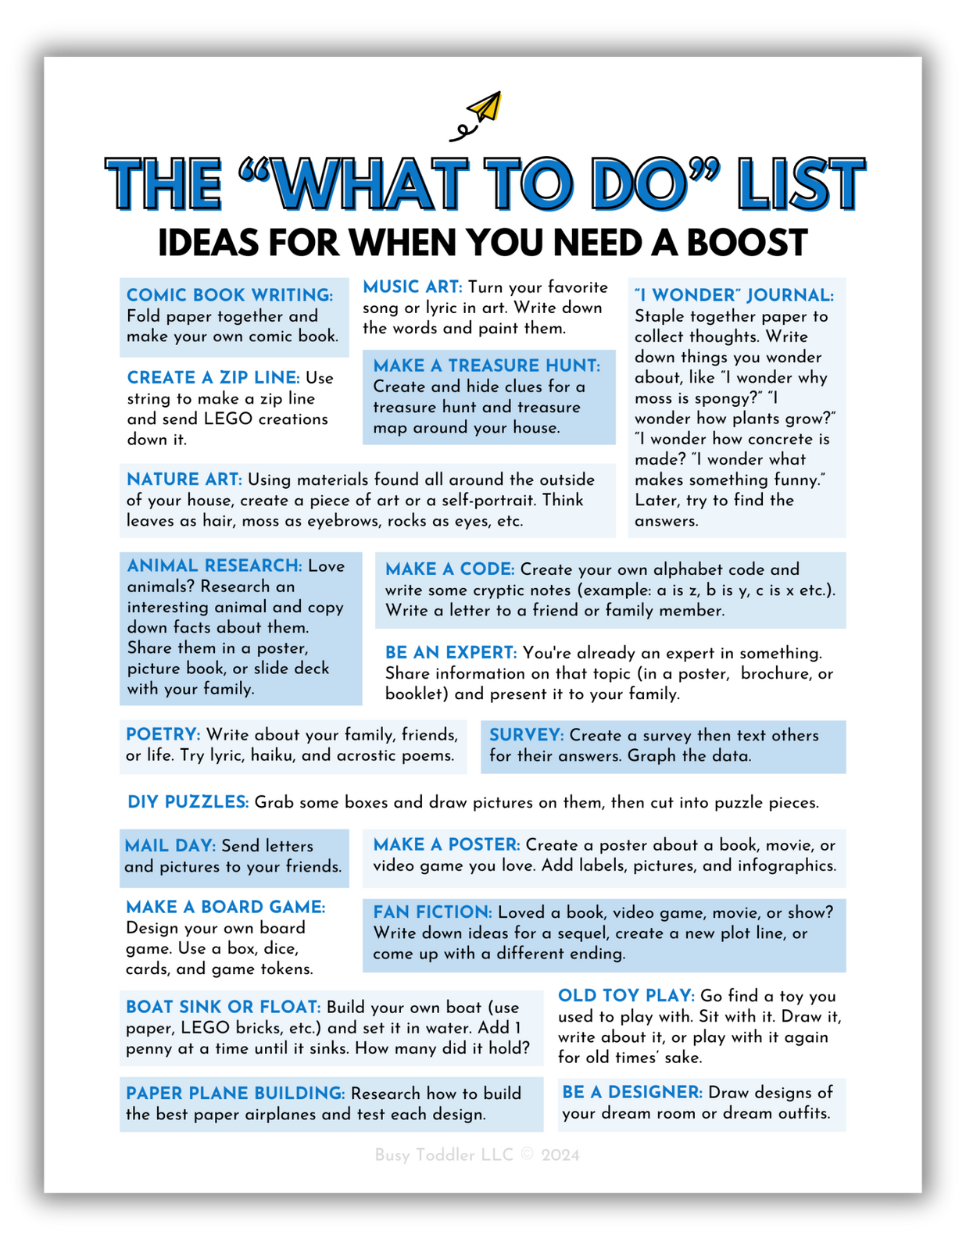 The What to Do List - Ideas for when you need a boost: a list of 20 activities for kids ages 8-12 years old